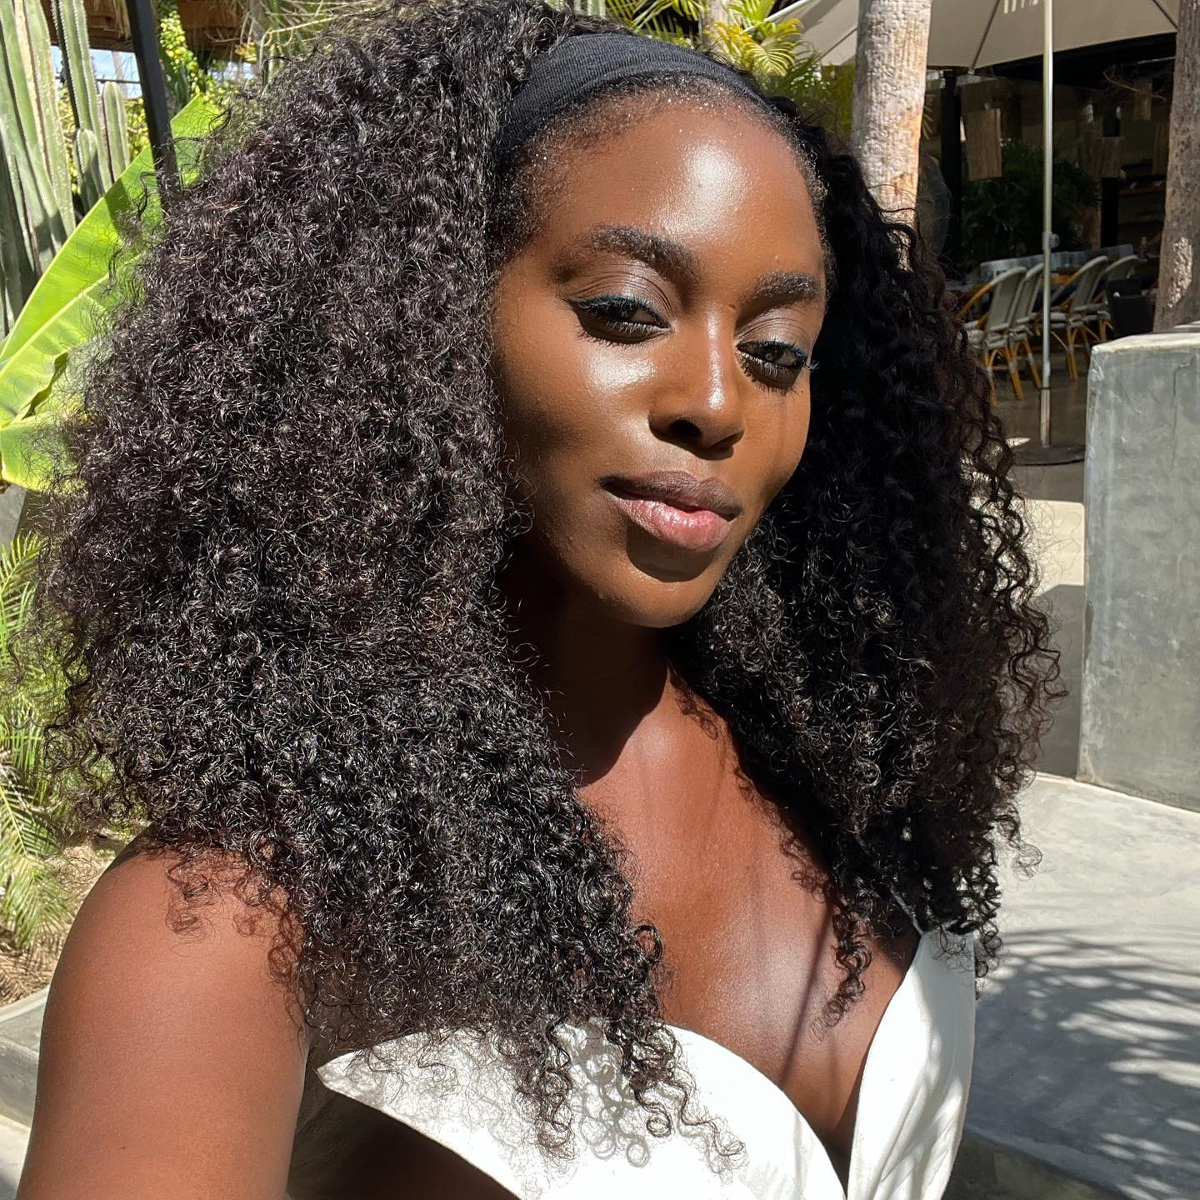 dilemma Canberra Smitsom sygdom Found: The 12 Best Bronzers for Dark Skin Tones | Who What Wear